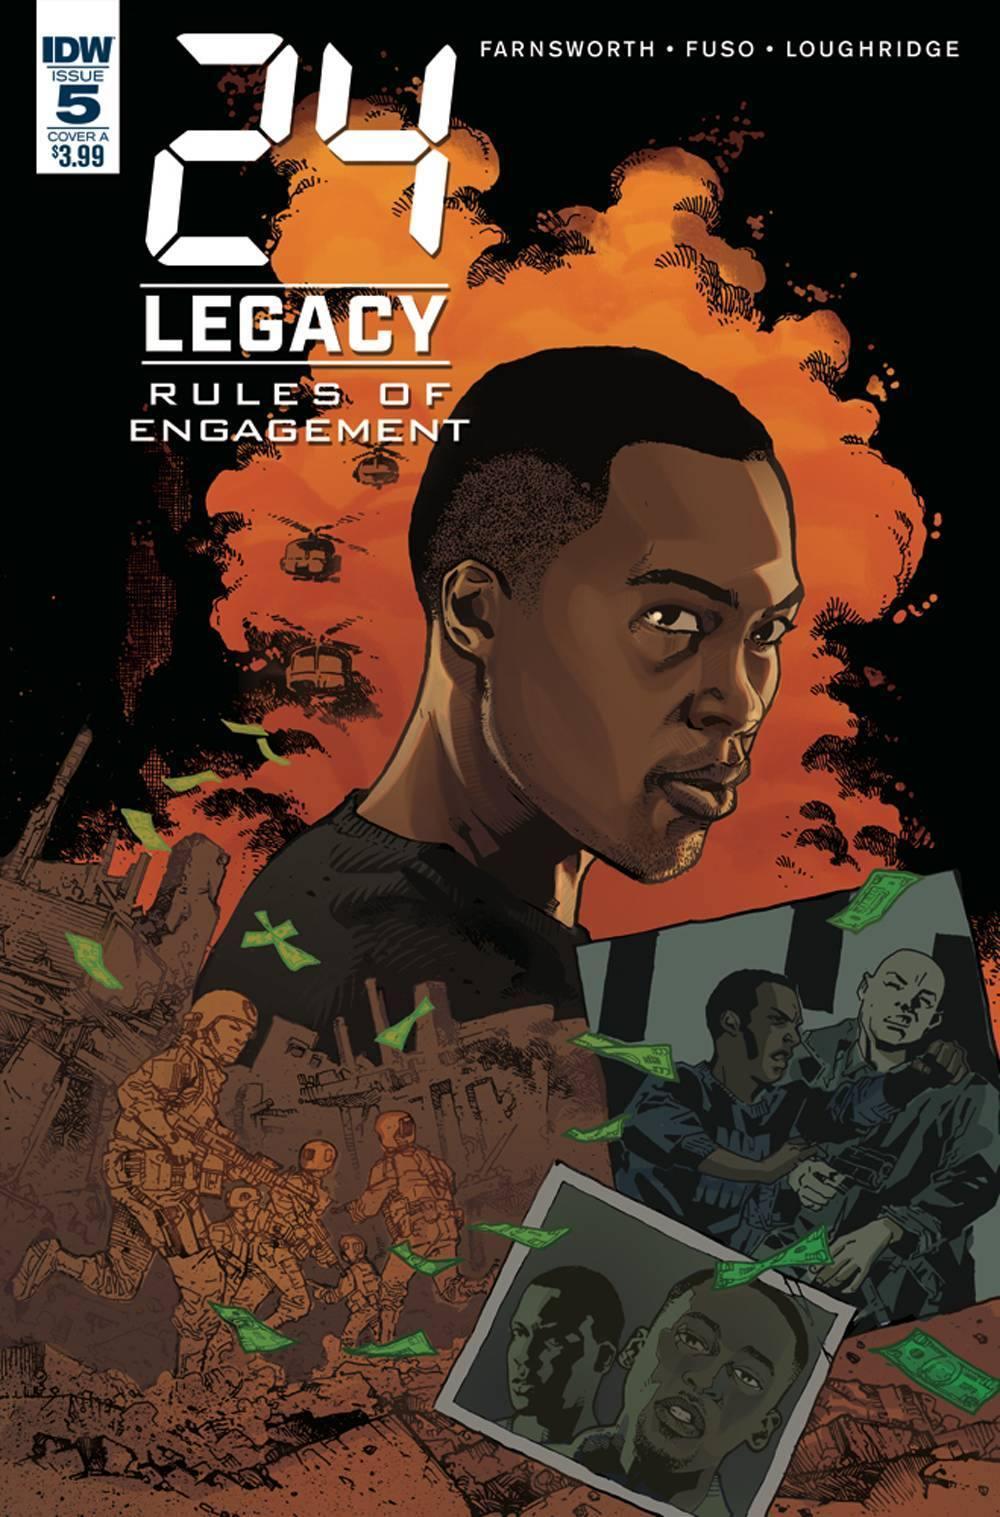 24 LEGACY RULES OF ENGAGEMENT #5 CVR A JEANTY - Kings Comics